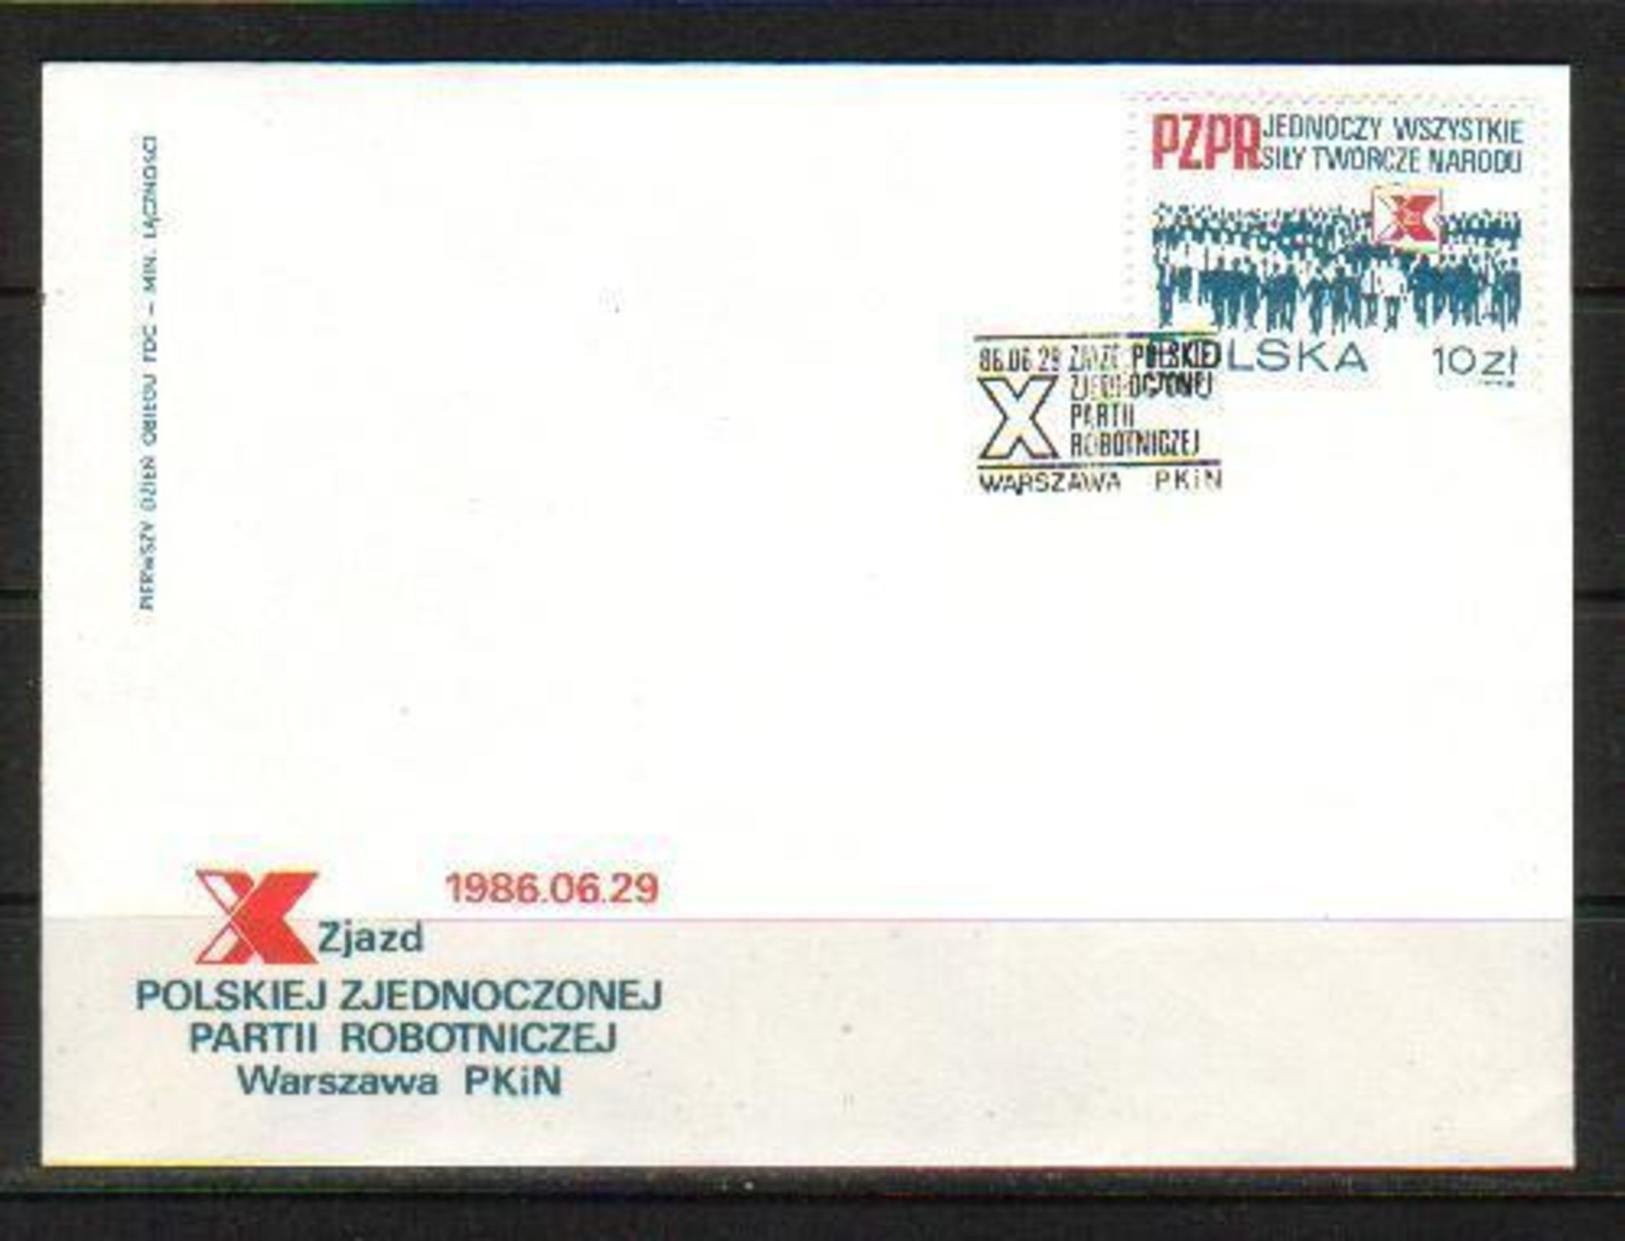 POLAND FDC 1986 10TH POLISH UNITED WORKERS' PARTY CONGRESS WARSAW PZPR Emblem - FDC